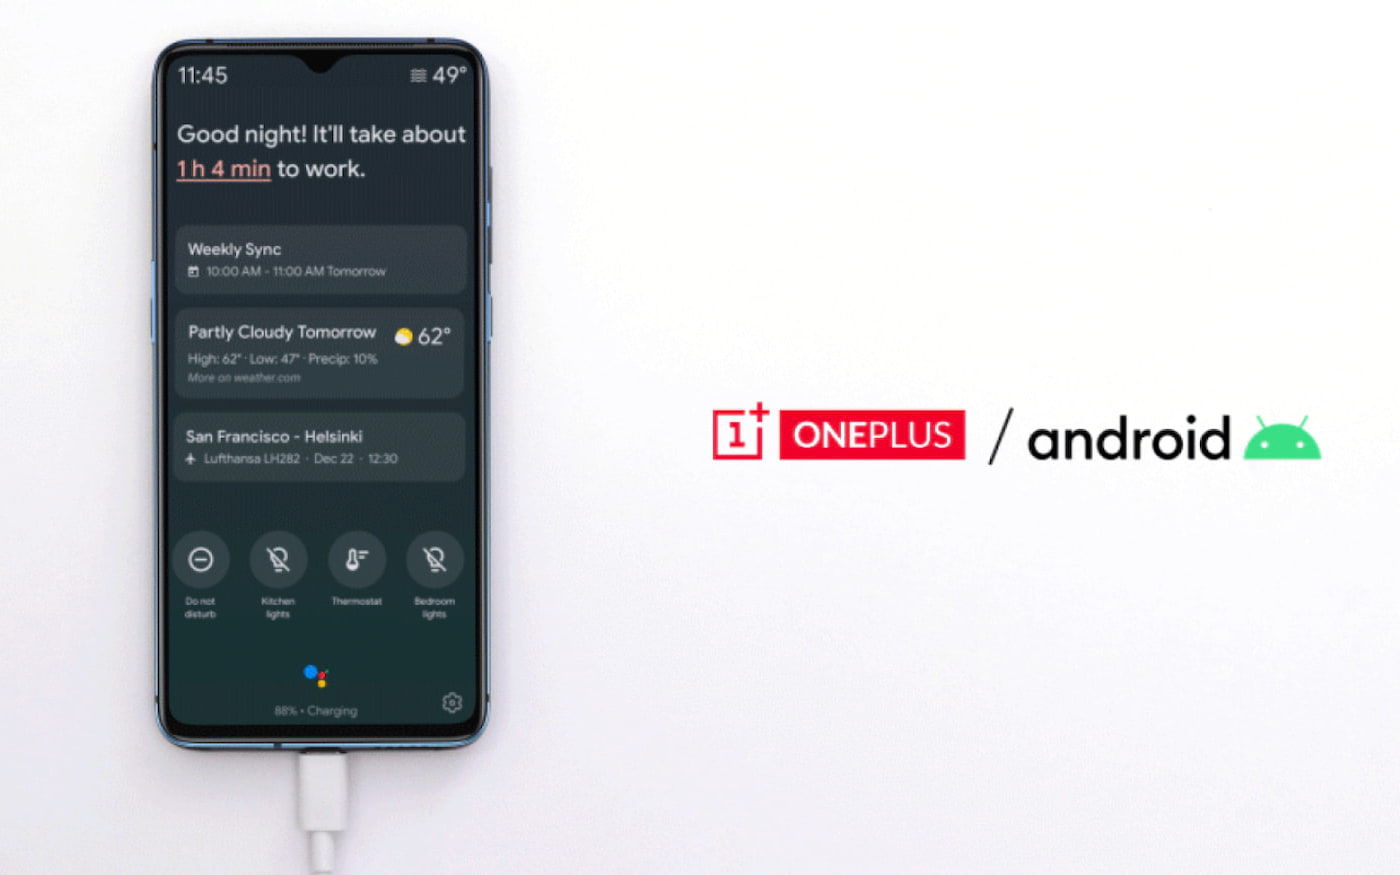 OnePlus phones get 'assistant mode' from Google Assistant, which makes the screen smart